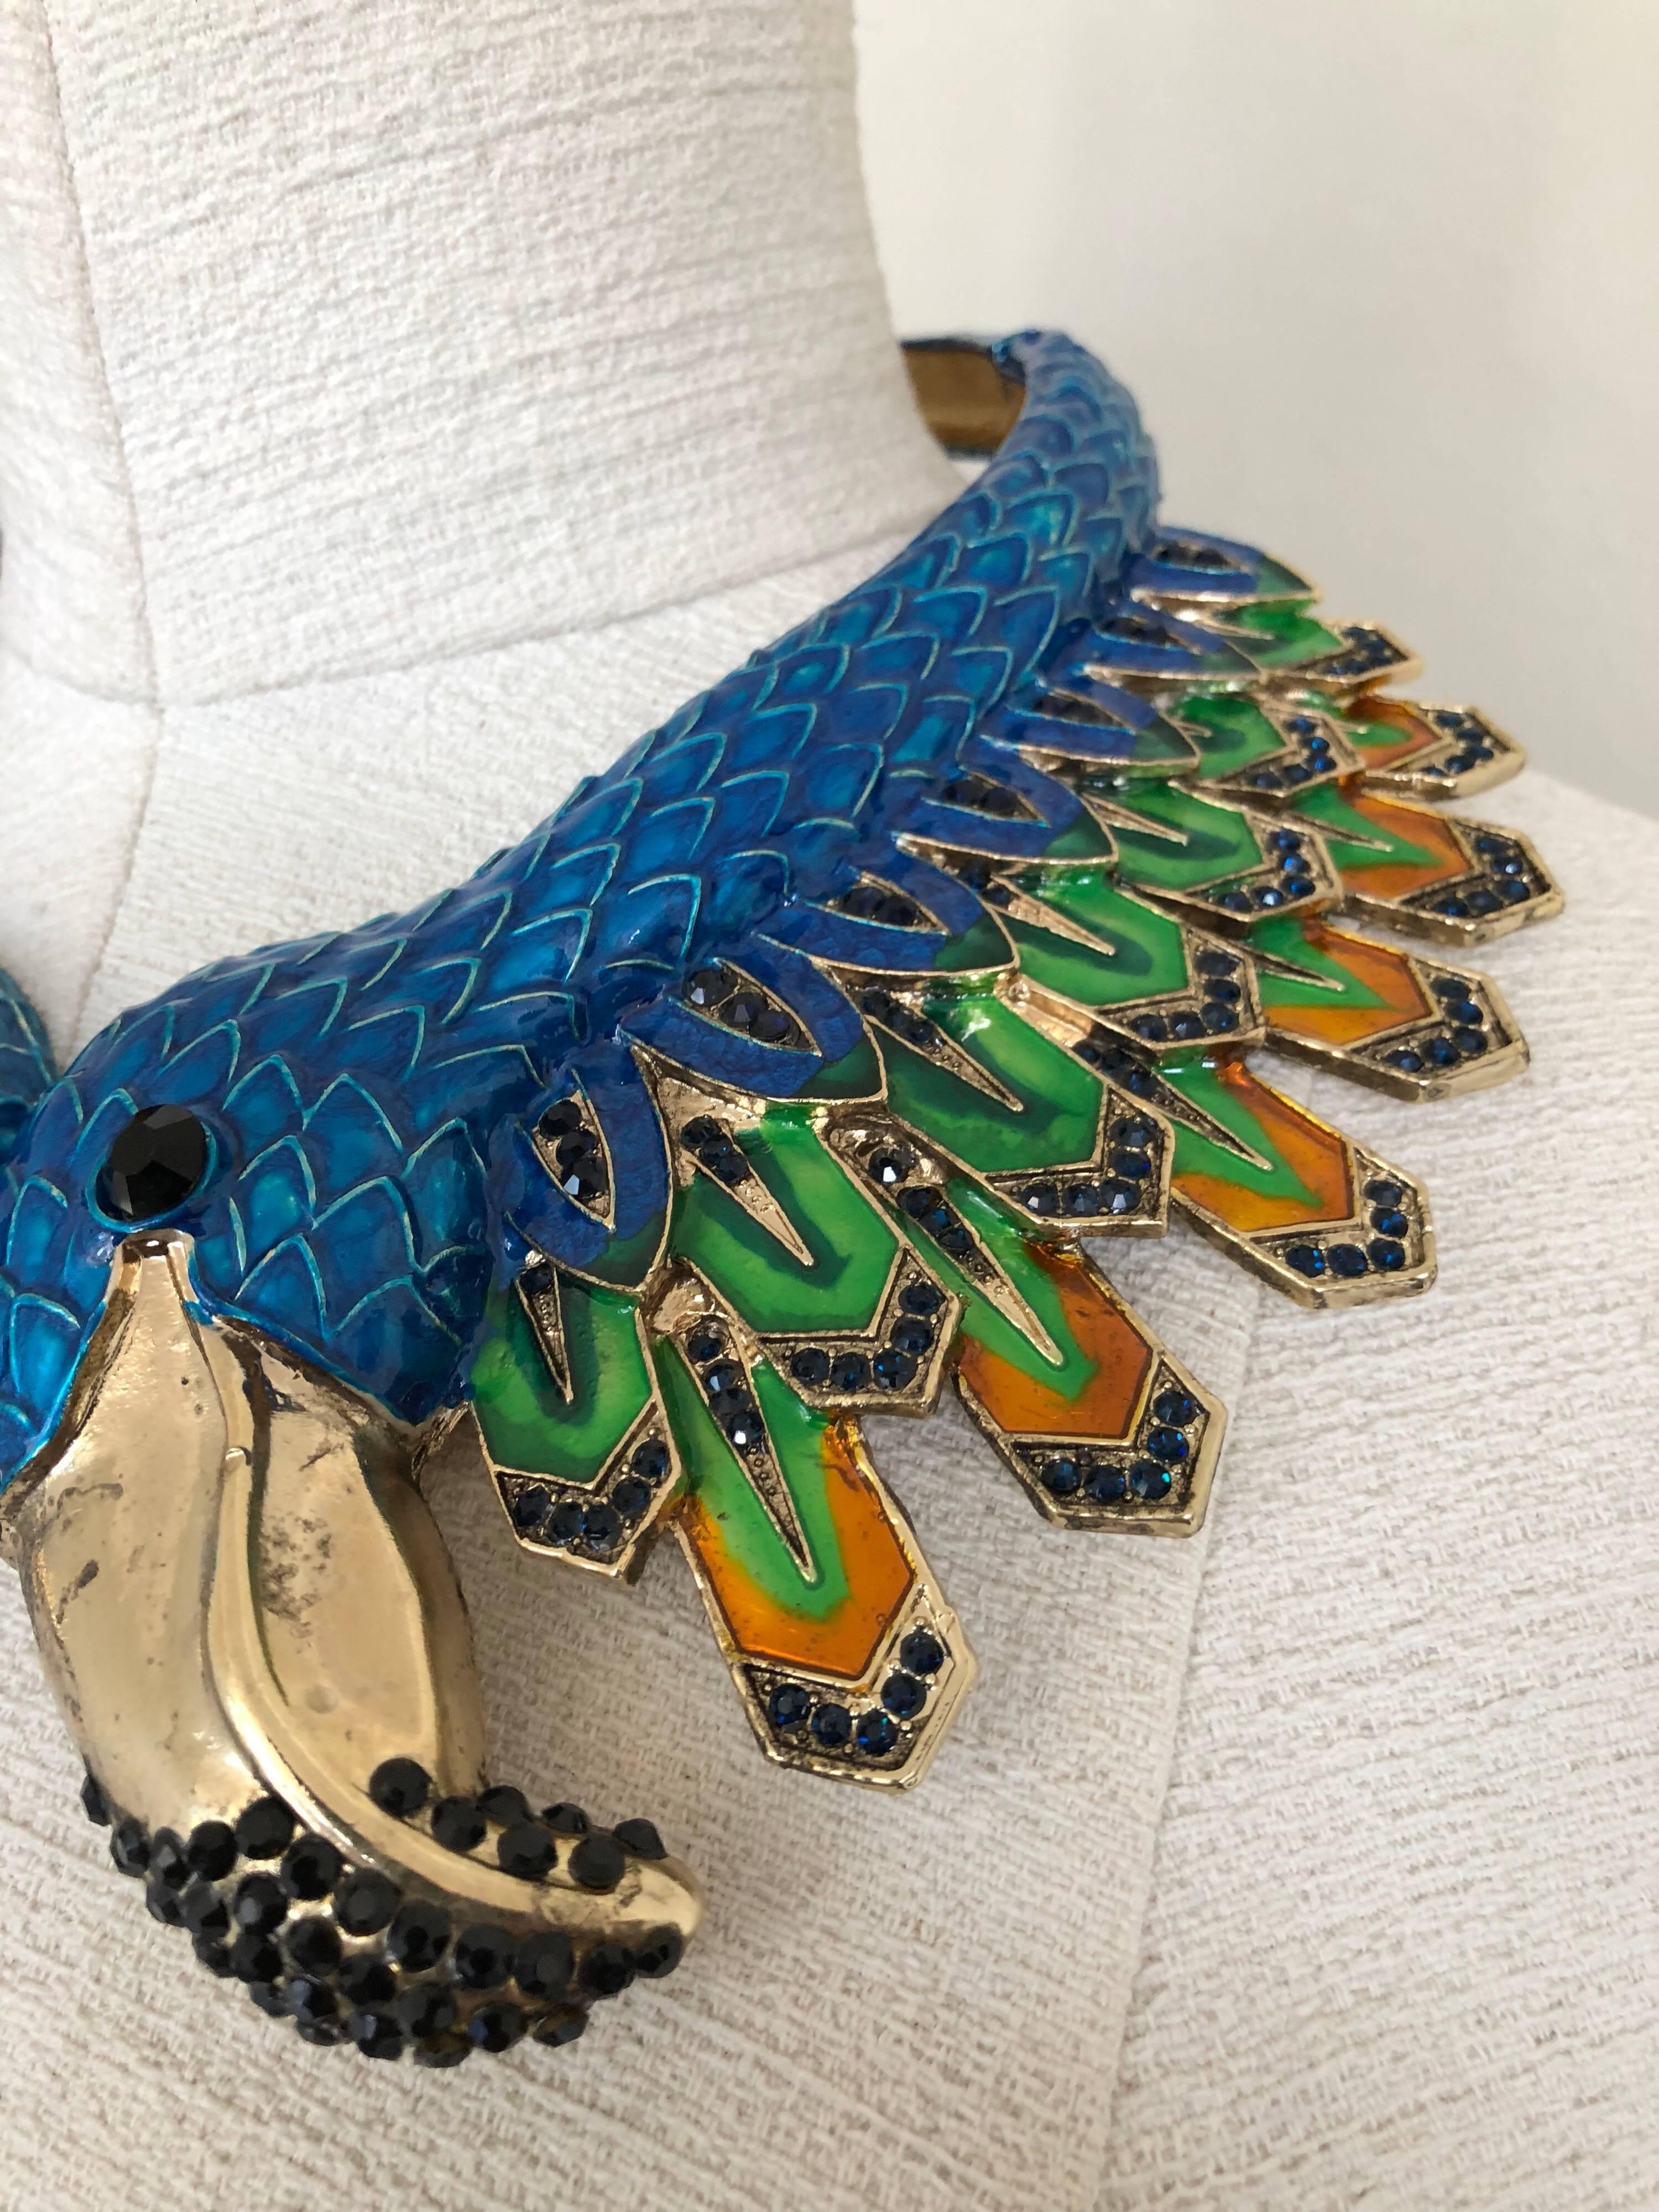 A bold 1980s Azure blue enameled deco style exotic bird hinged collar necklace features lifelike feather details and black crystal speckles throughout the entire collar design.
This very heavy hinged collar allows one to slide the necklace on with